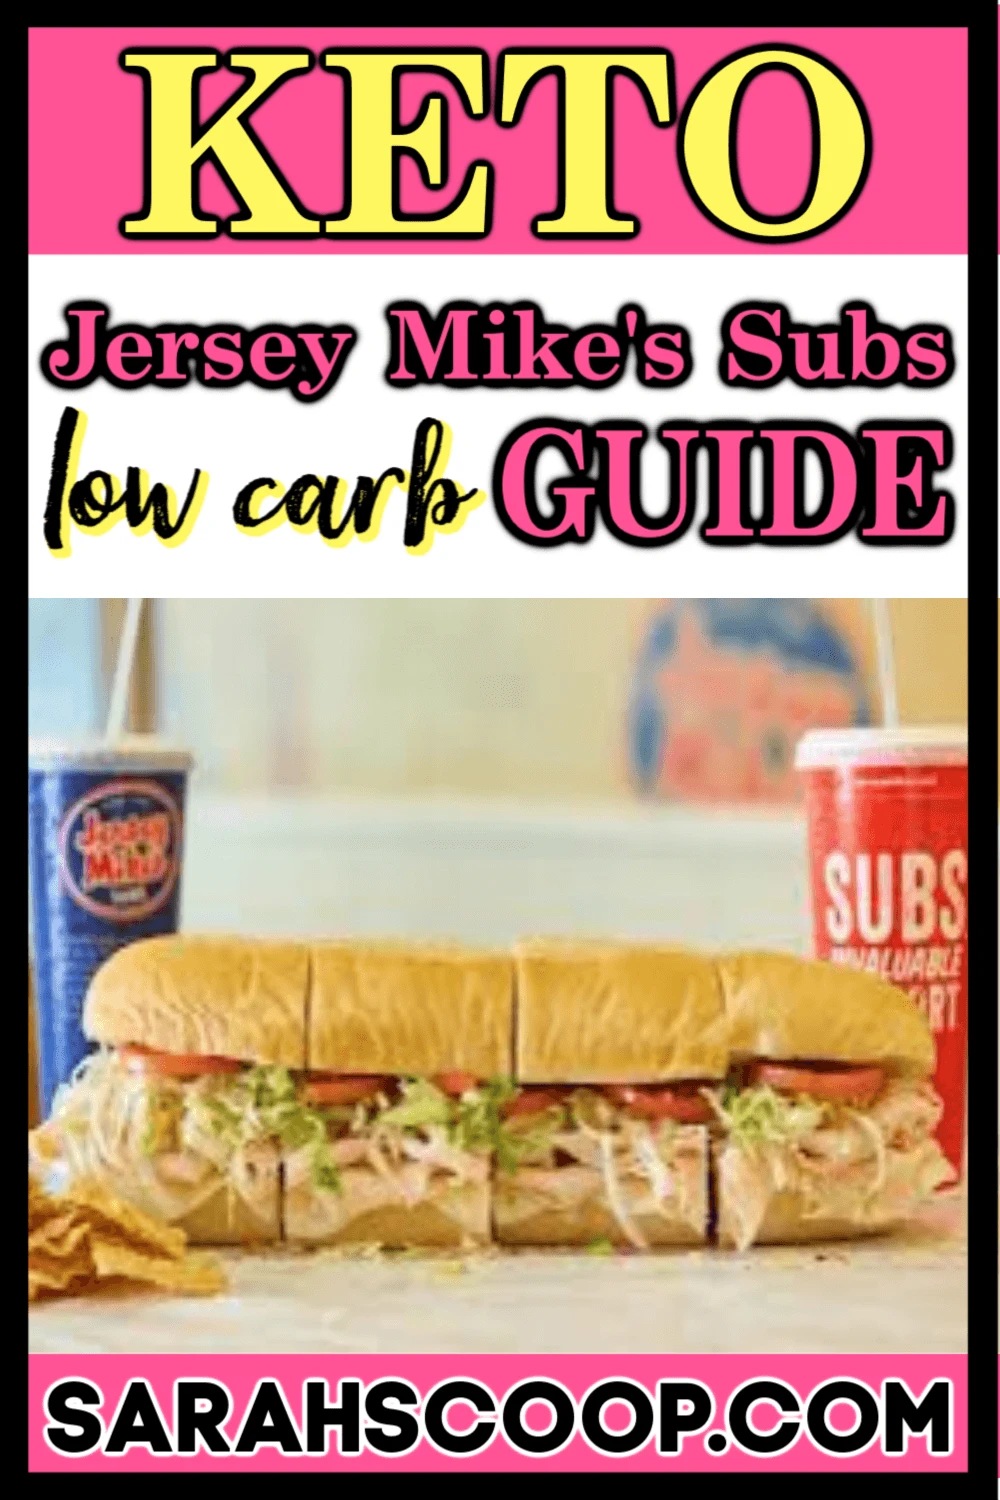 keto jersey mike's